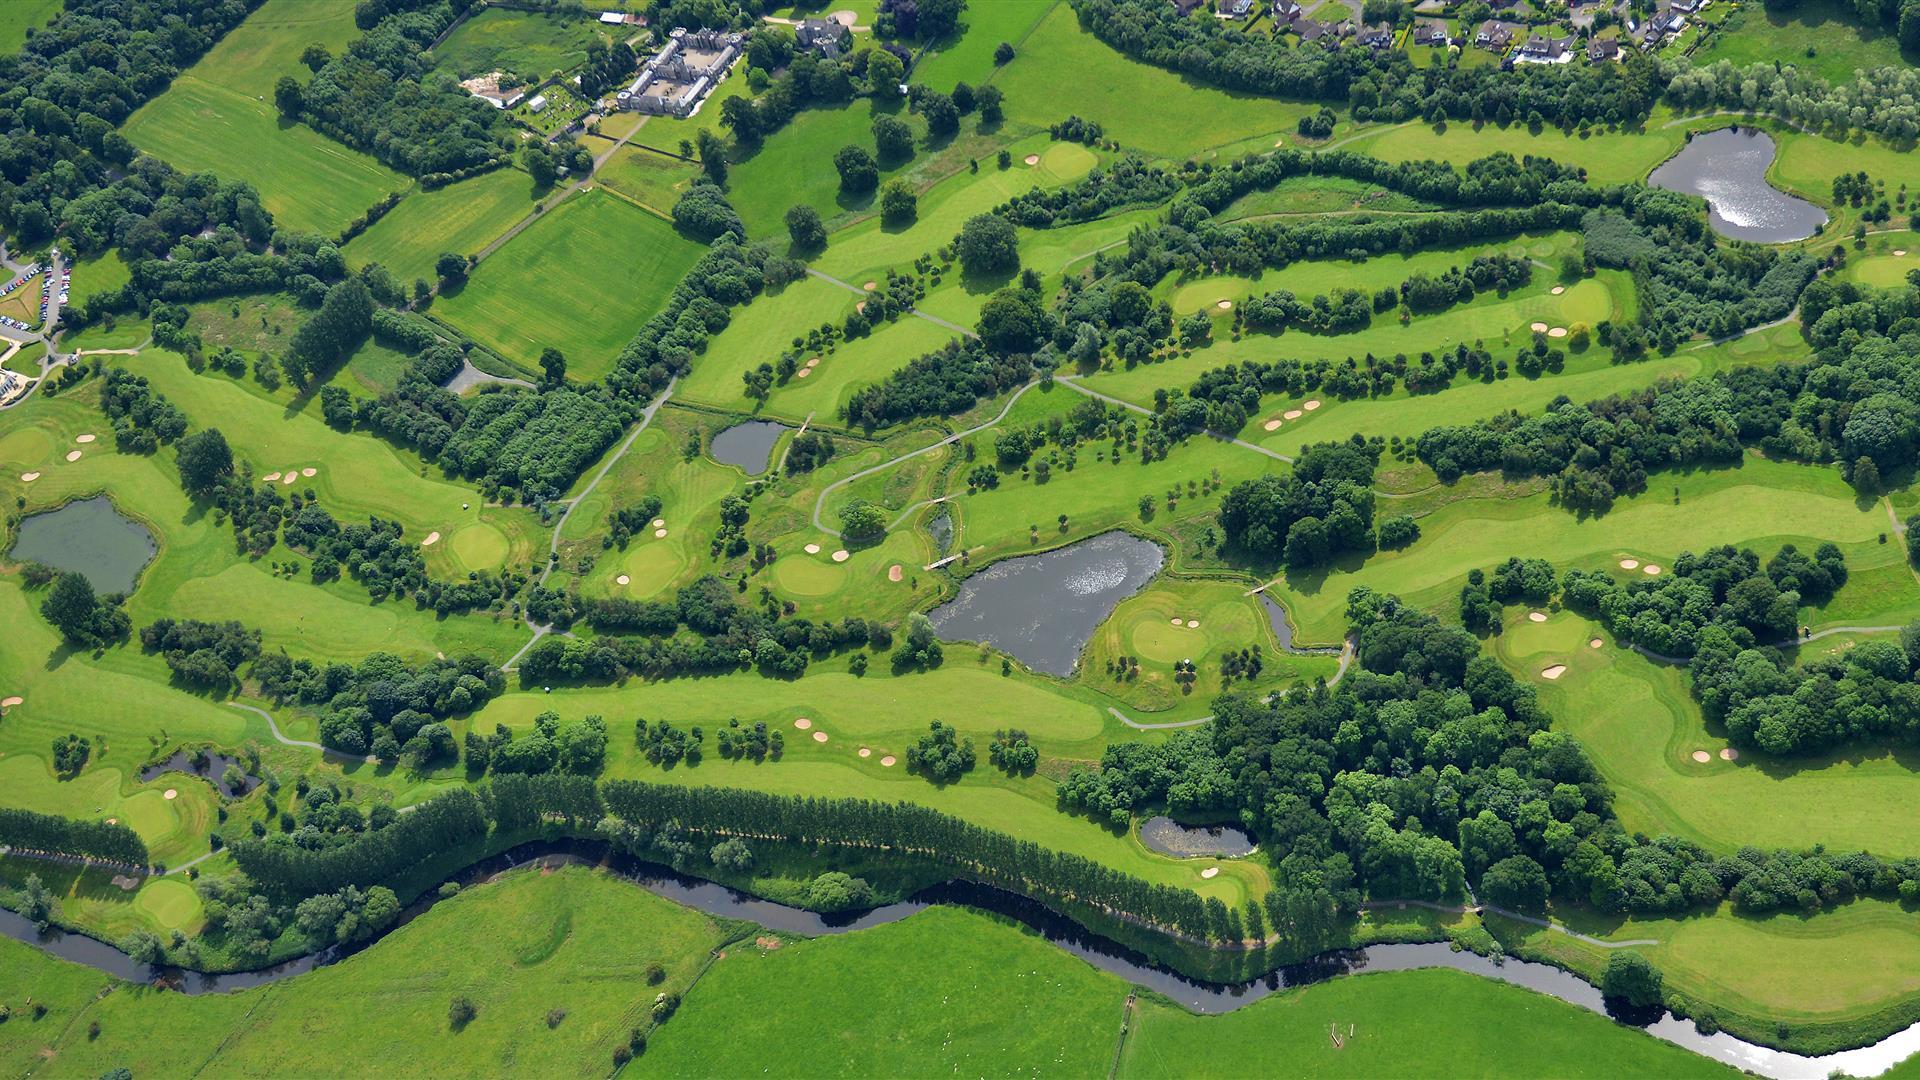 Templepatrick Golf Club at Kingfisher Country Estate